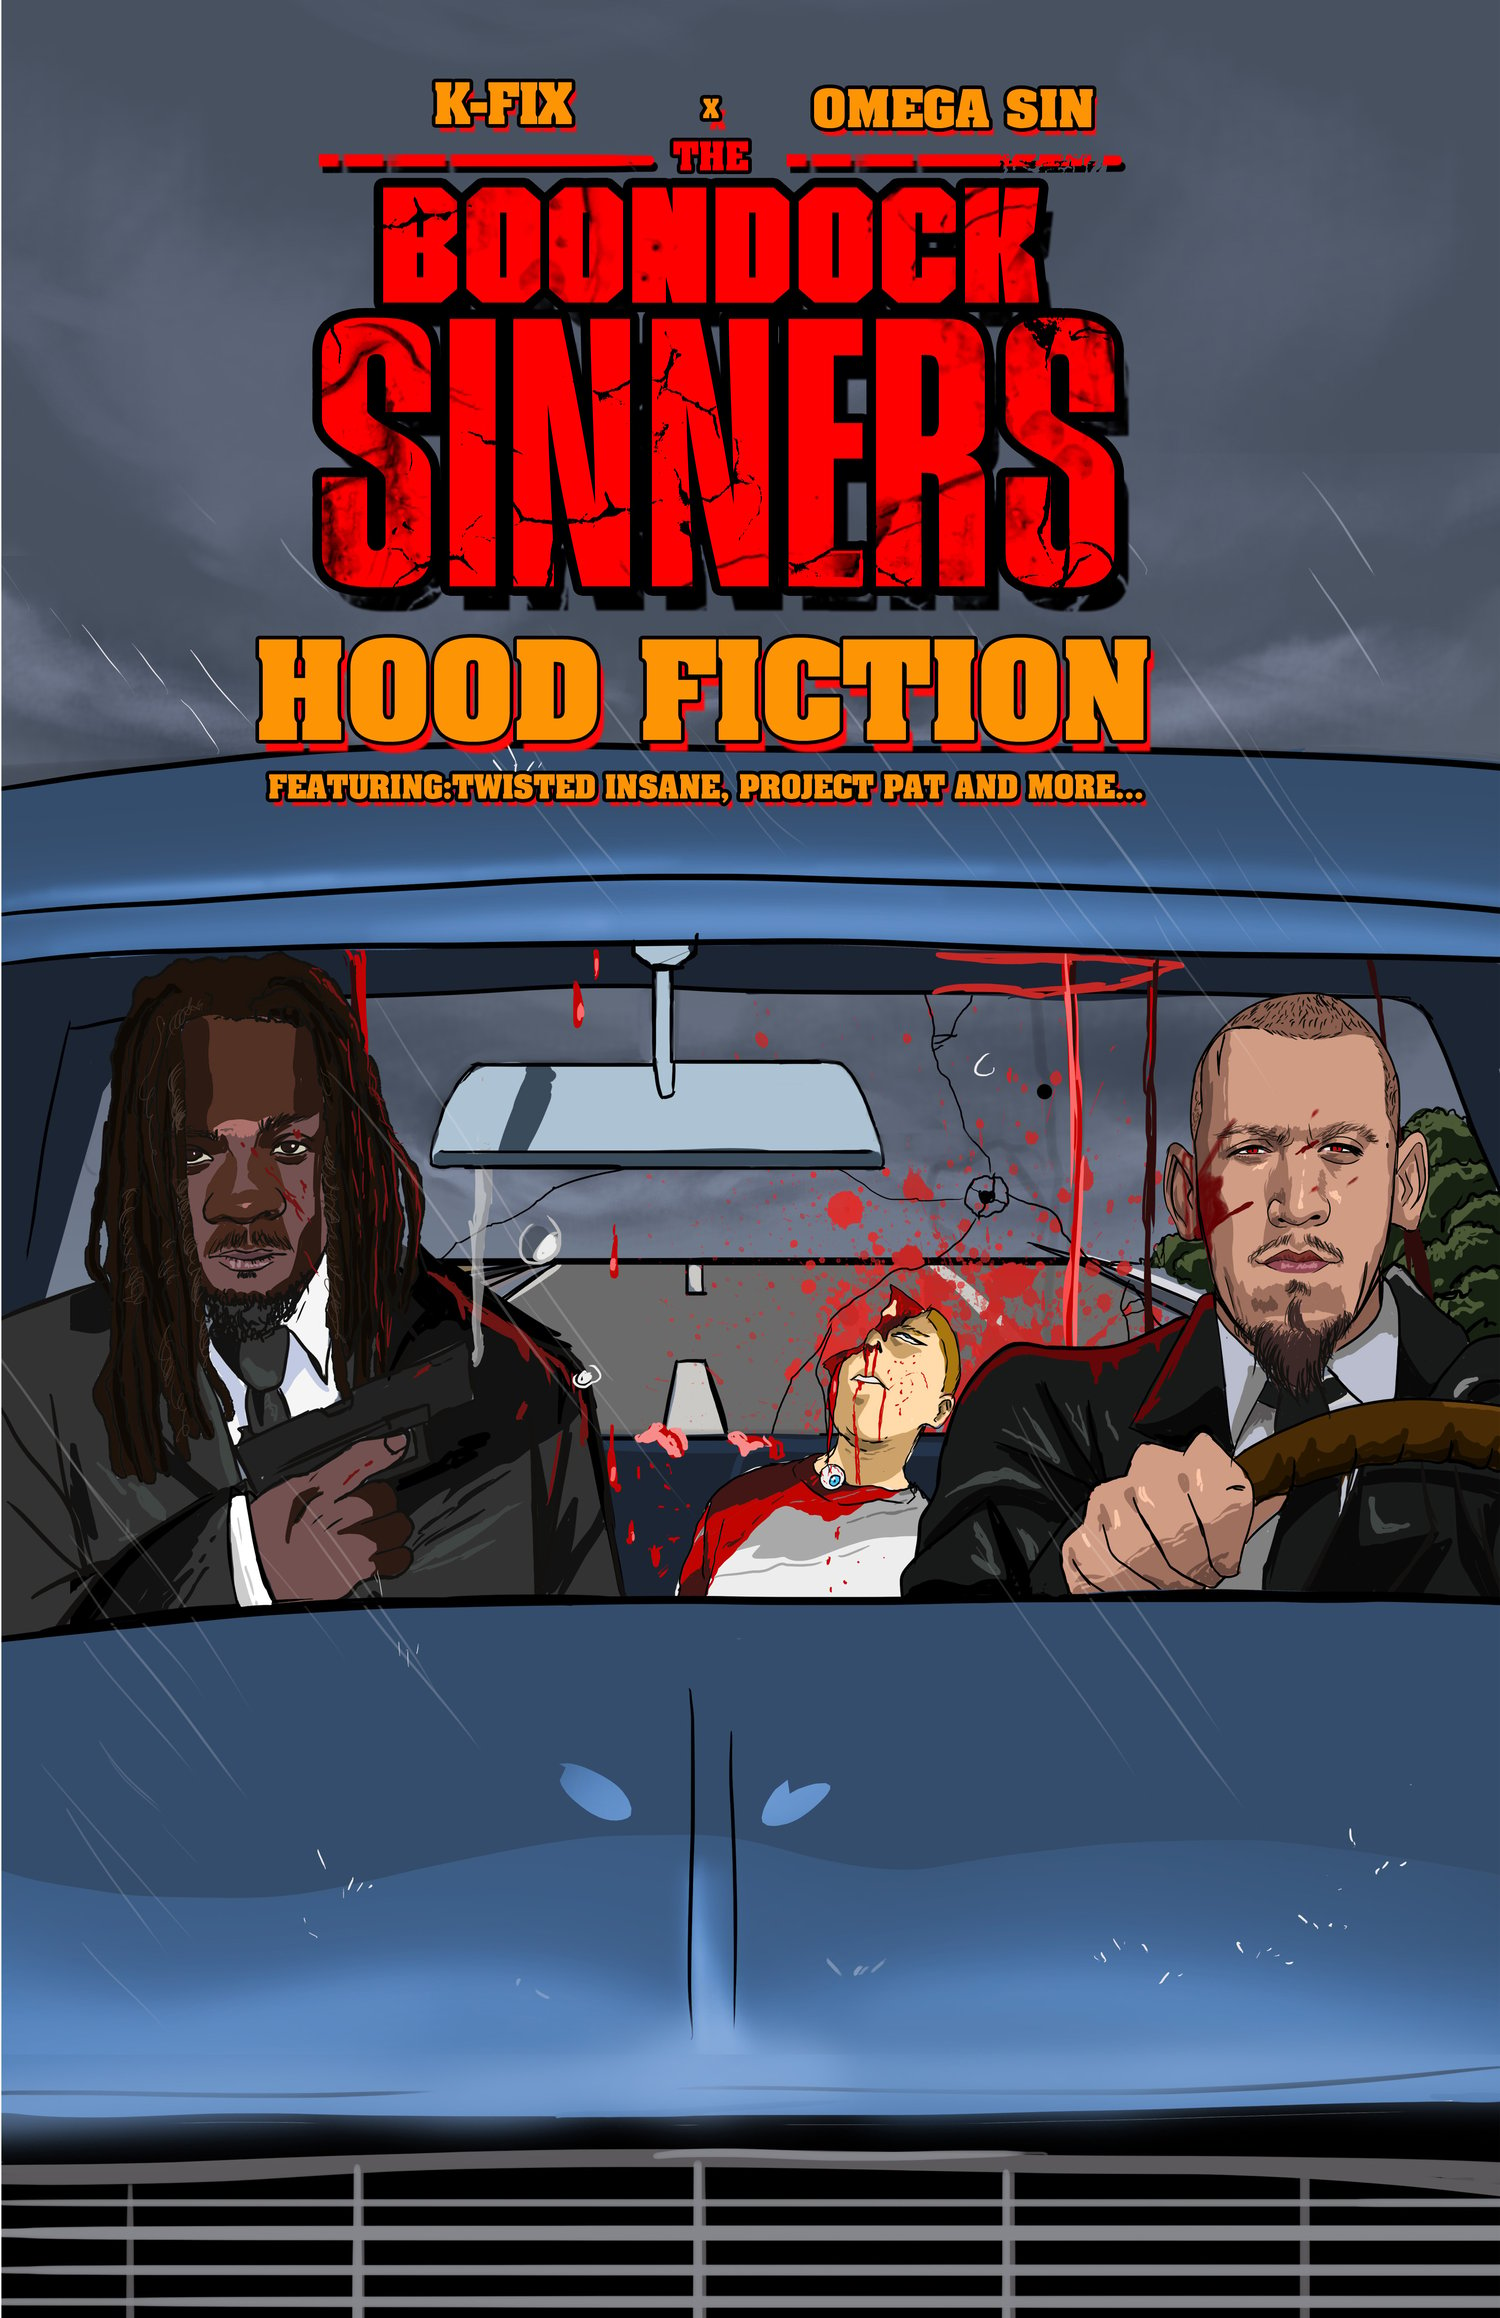 Image of The Boondock Sinners Poster